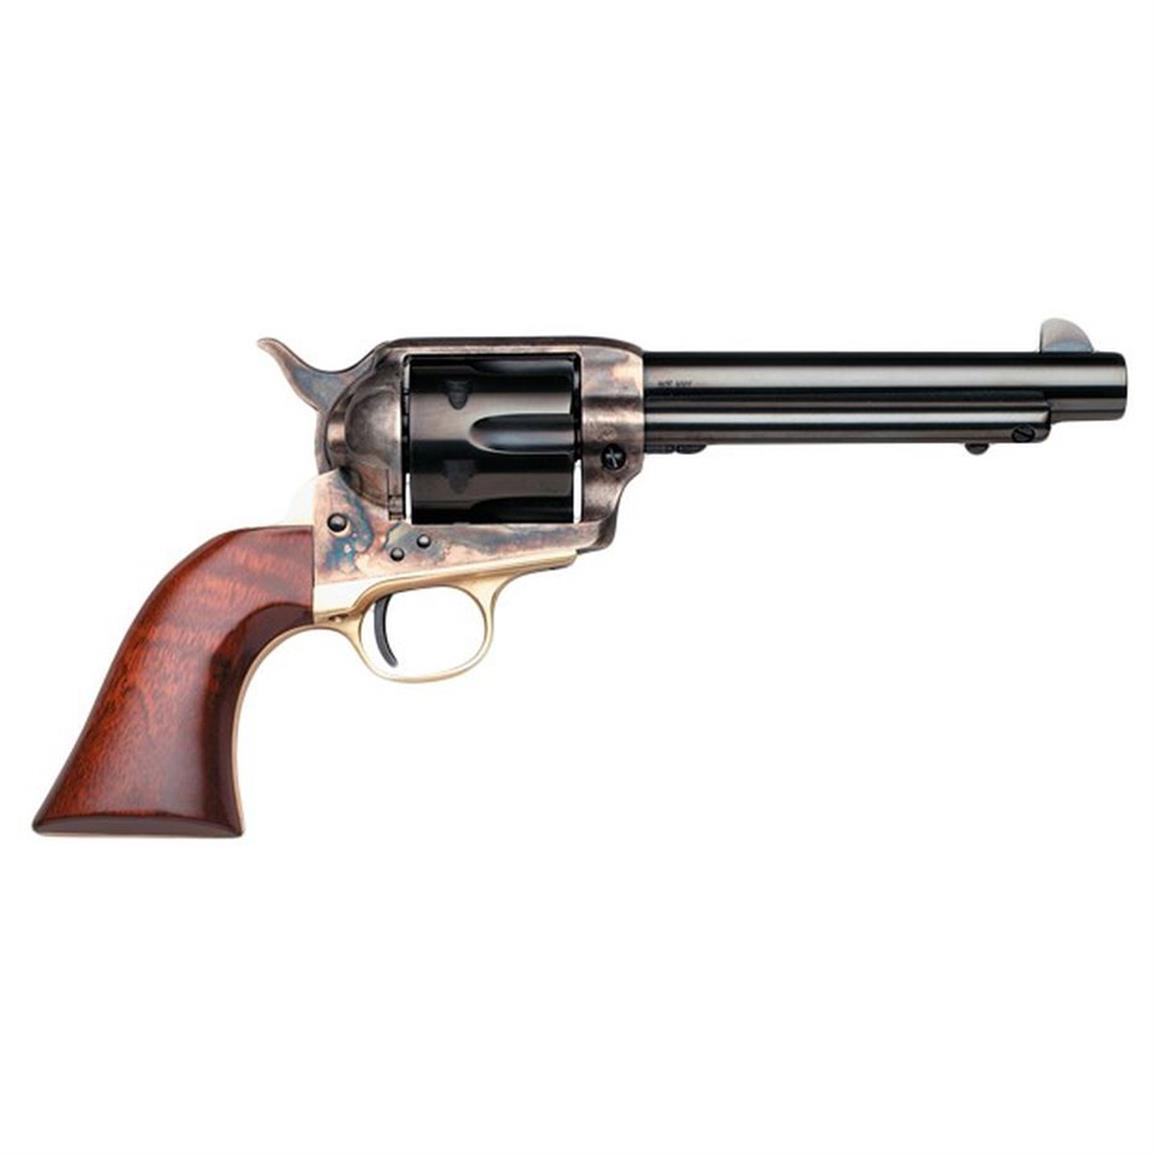 Taylor's & Co. Uberti The Ranch Hand, Revolver, .357 Magnum, 5.5" Barrel, 6 Rounds